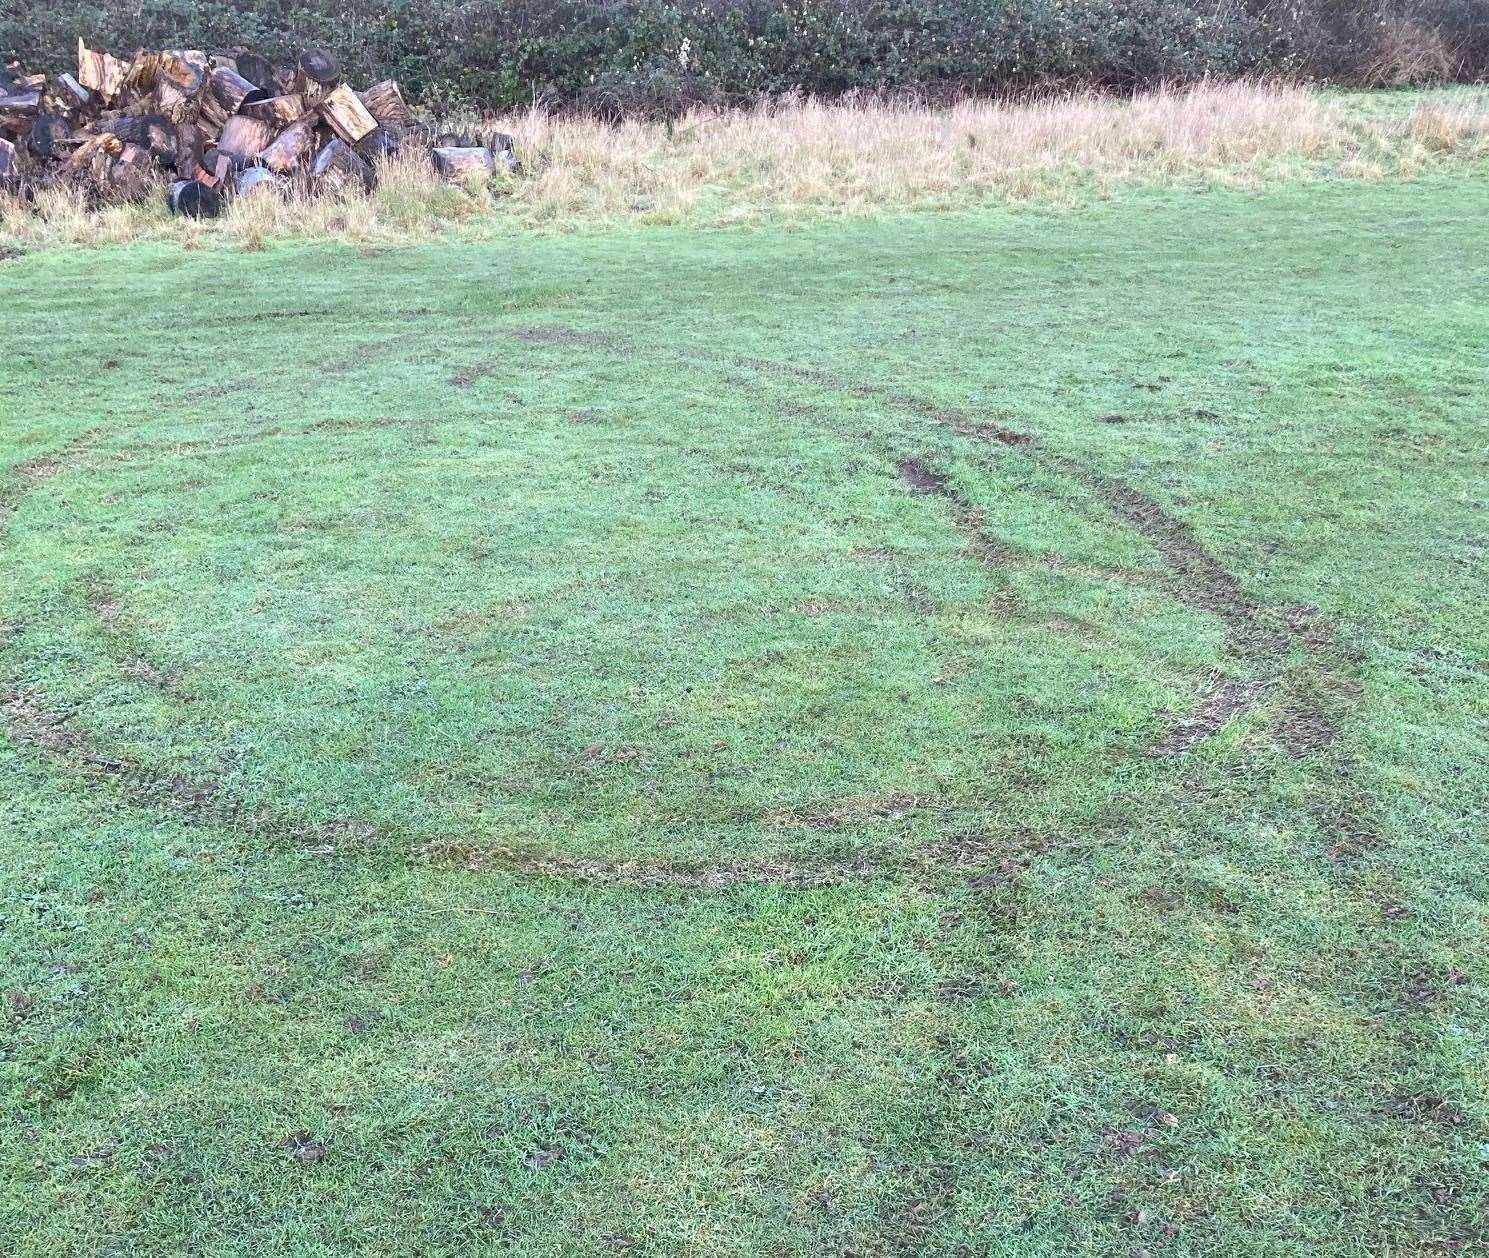 The damage caused by the quad bike at Duncan Down in Whitstable. Picture: Ashley Clark